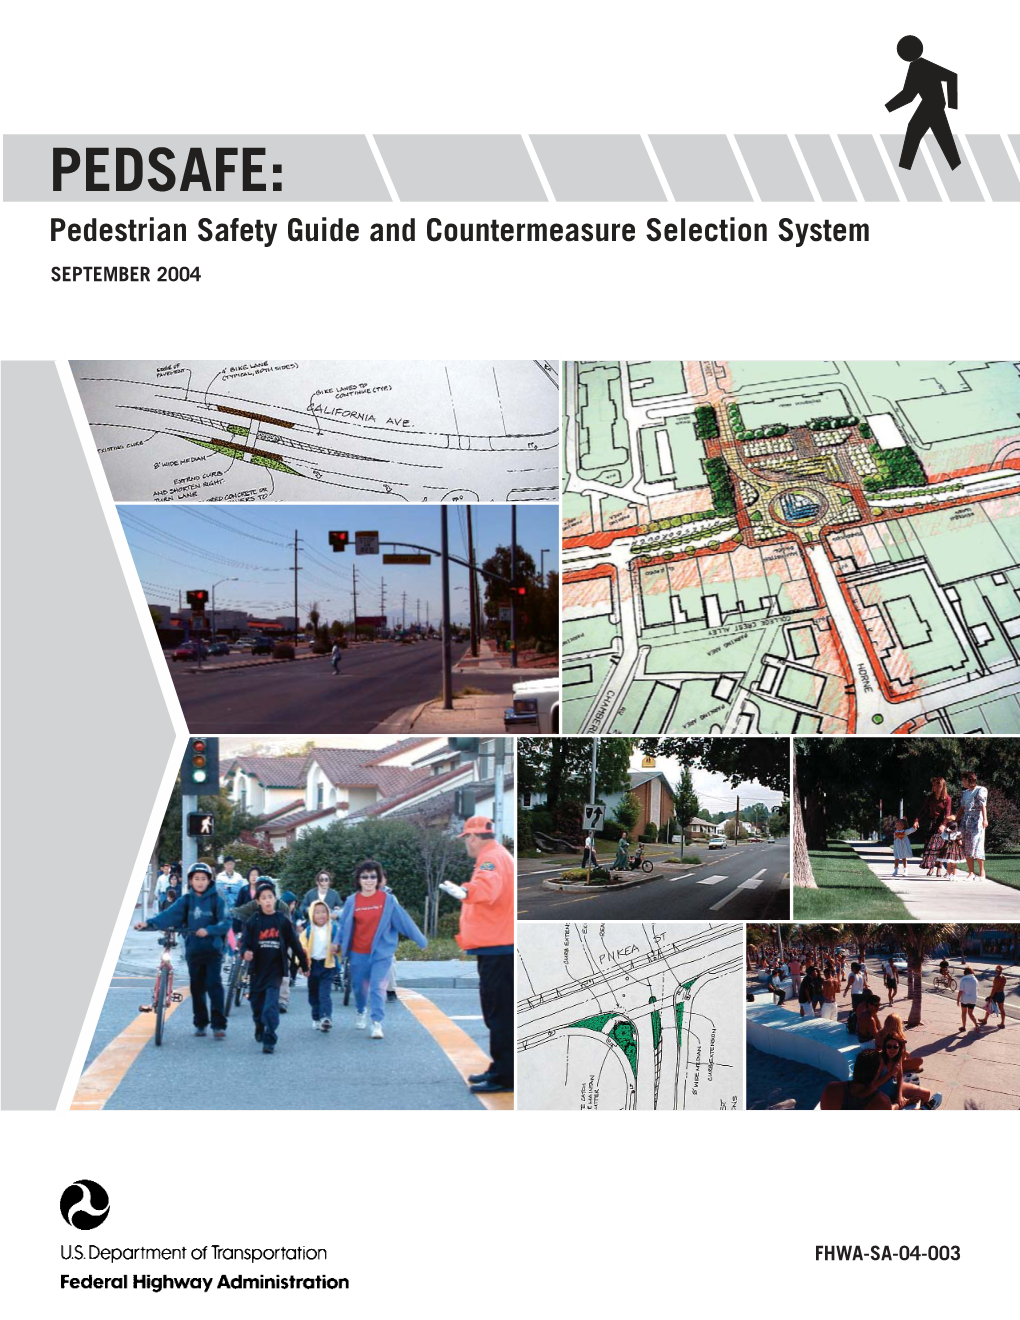 PEDSAFE: Pedestrian Safety Guide and Countermeasure Selection System SEPTEMBER 2004